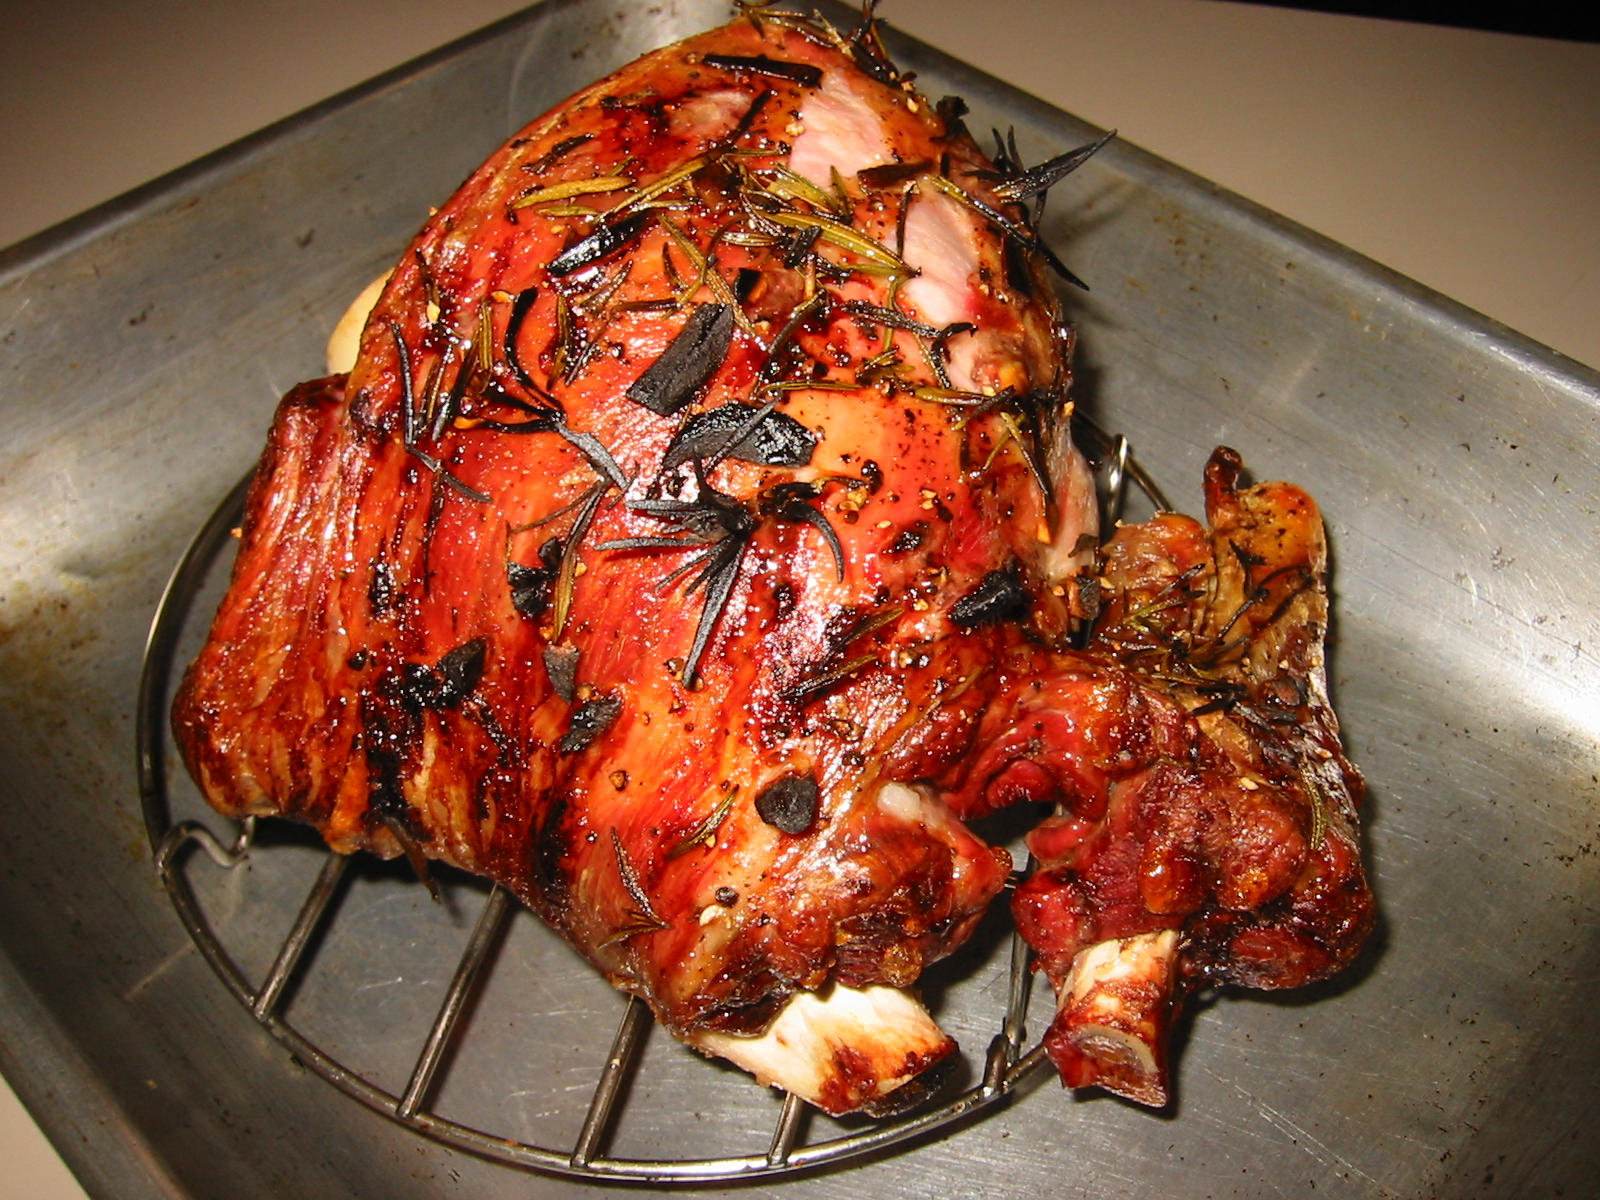 Another view of the lamb roast